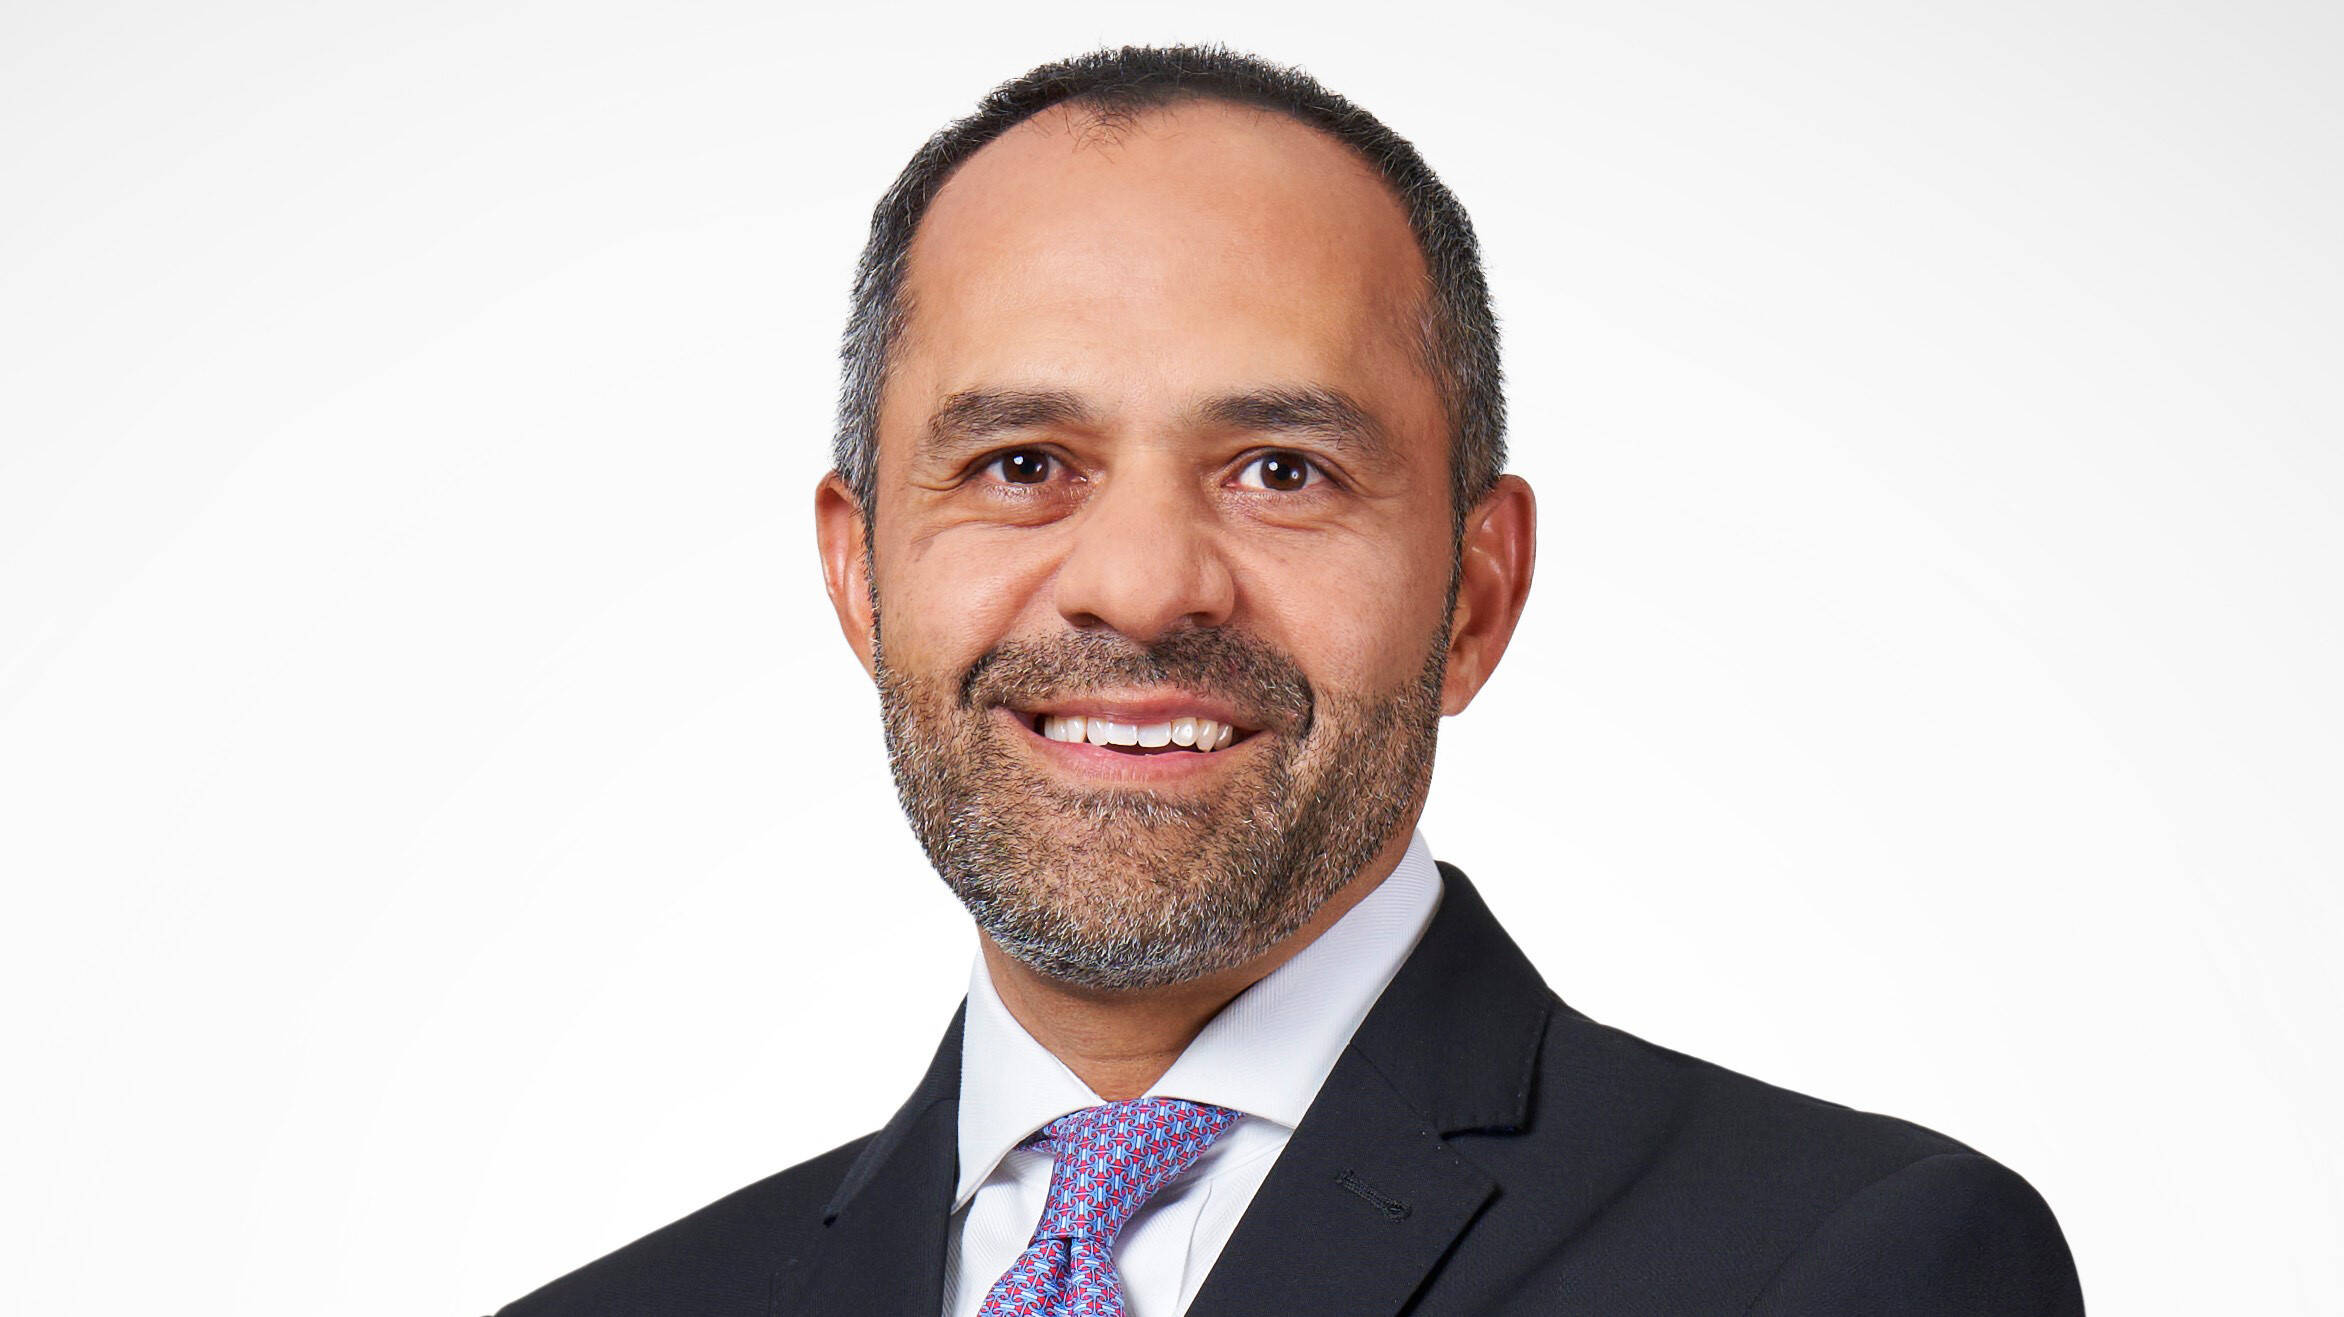 Professional headshot of Irtiza Sayyed, Vice President for Asia Pacific for Low Carbon Solutions.